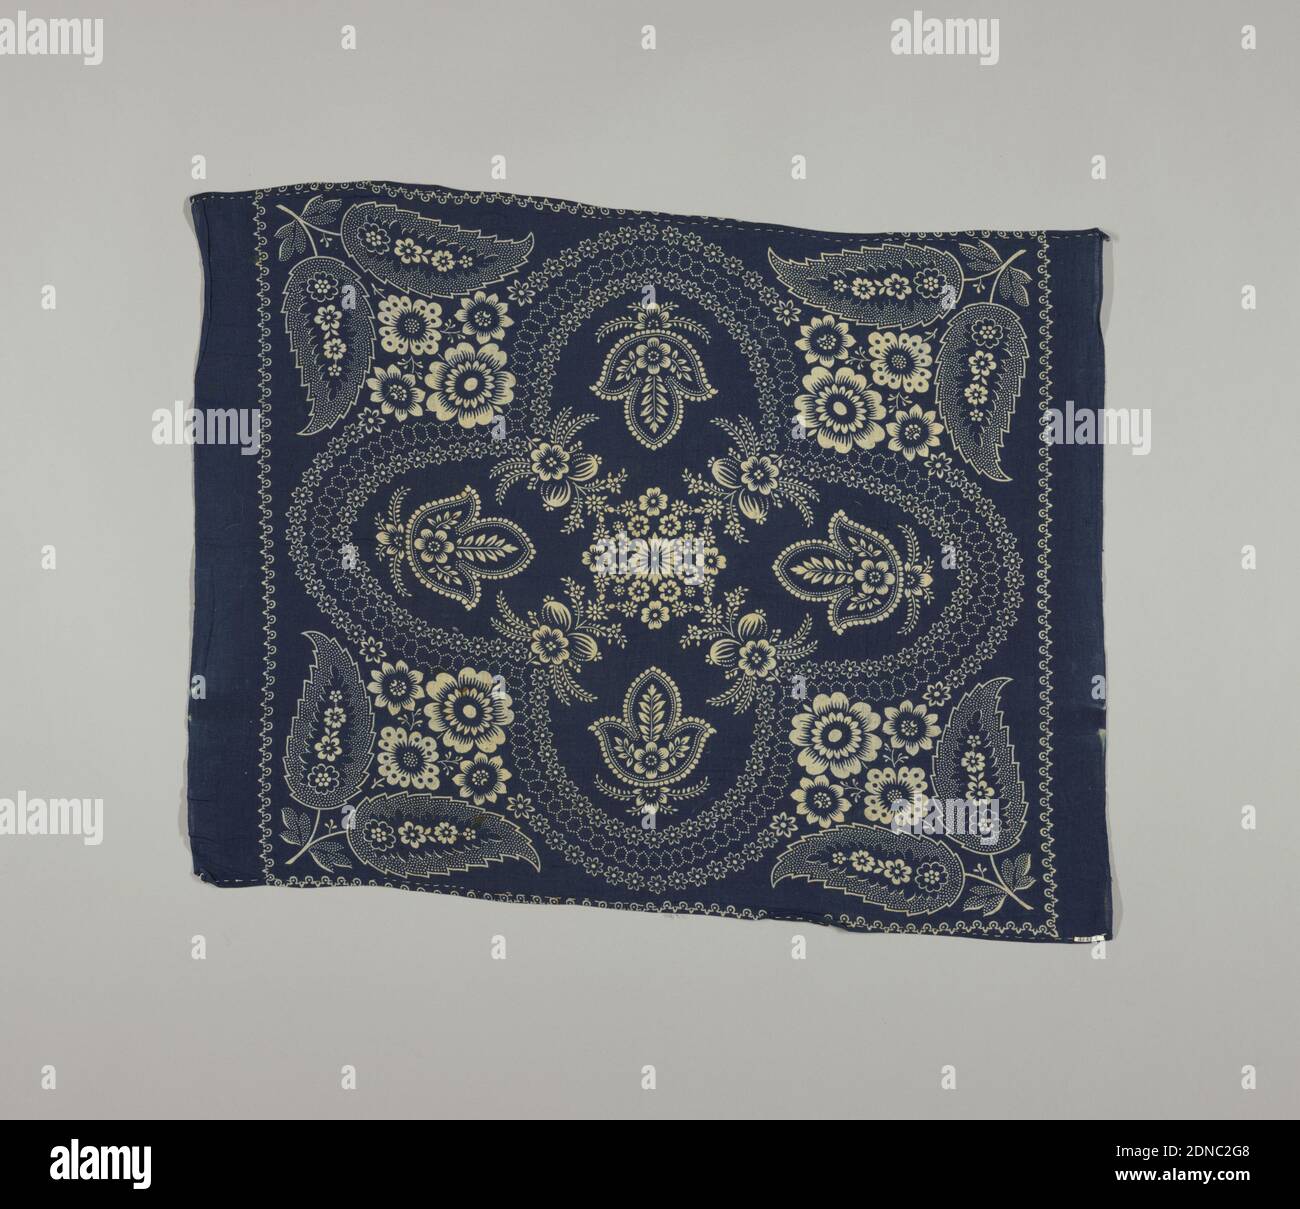 Square, Medium: cotton Technique: discharge printed, Blue handkerchief printed with a design of white flowers, leaves and dots., possibly Germany, 19th century, printed, dyed & painted textiles, Square Stock Photo